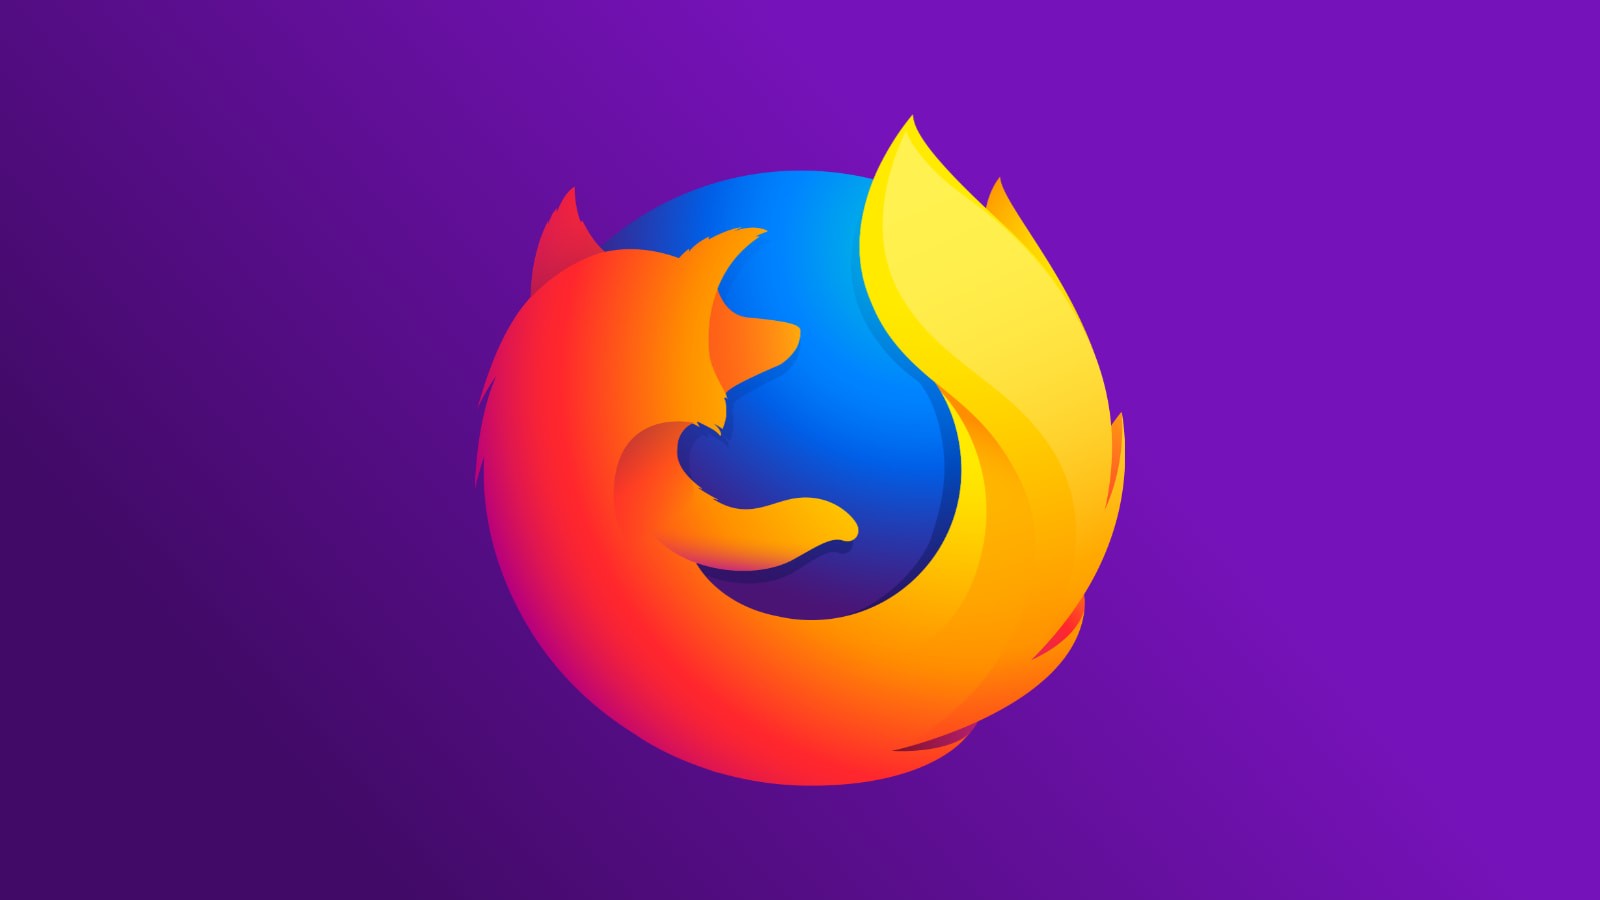 download the last version for ipod Mozilla Firefox 115.0.2